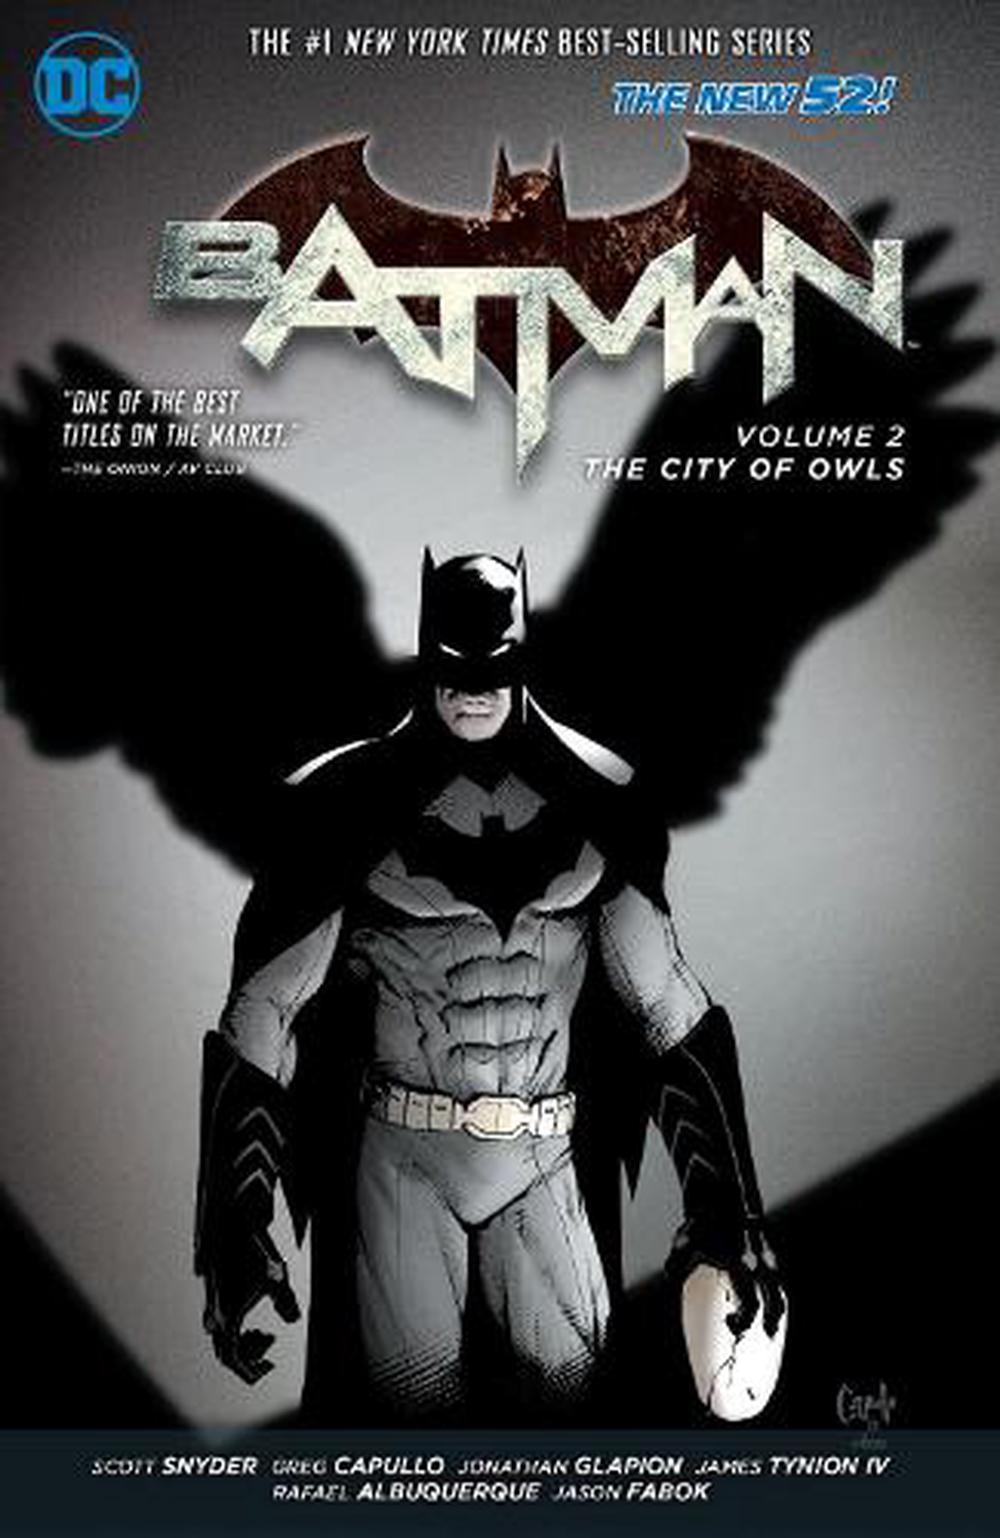 Batman Vol. 2: The City of Owls (the New 52) by Scott Snyder, Paperback,  9781401237783 | Buy online at The Nile